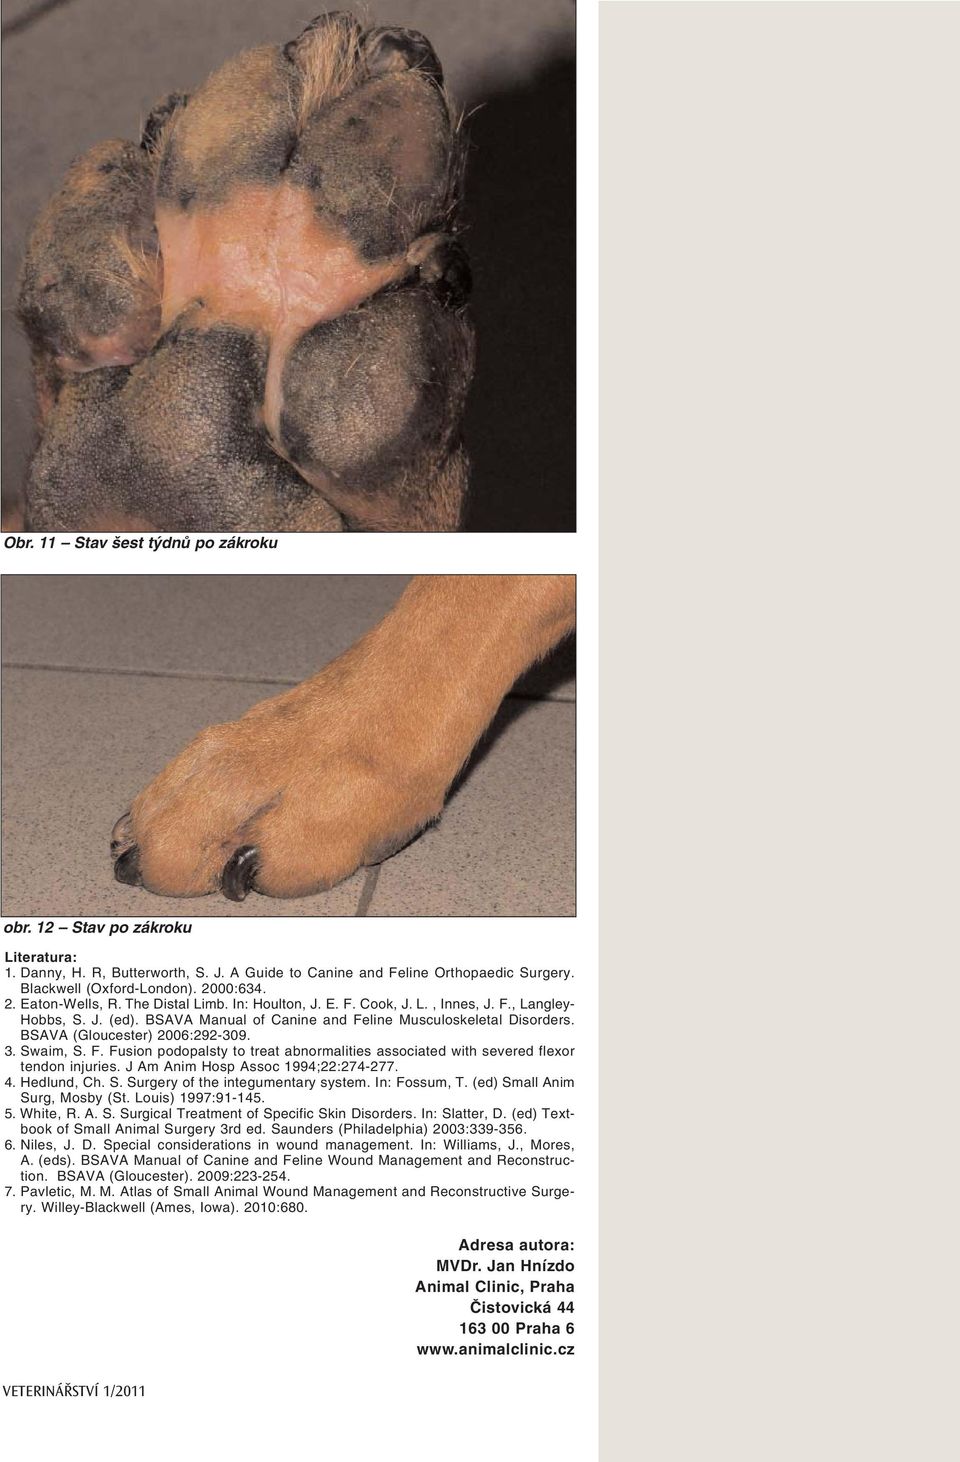 BSAVA (Gloucester) 2006:292-309. 3. Swaim, S. F. Fusion podopalsty to treat abnormalities associated with severed flexor tendon injuries. J Am Anim Hosp Assoc 1994;22:274-277. 4. Hedlund, Ch. S. Surgery of the integumentary system.